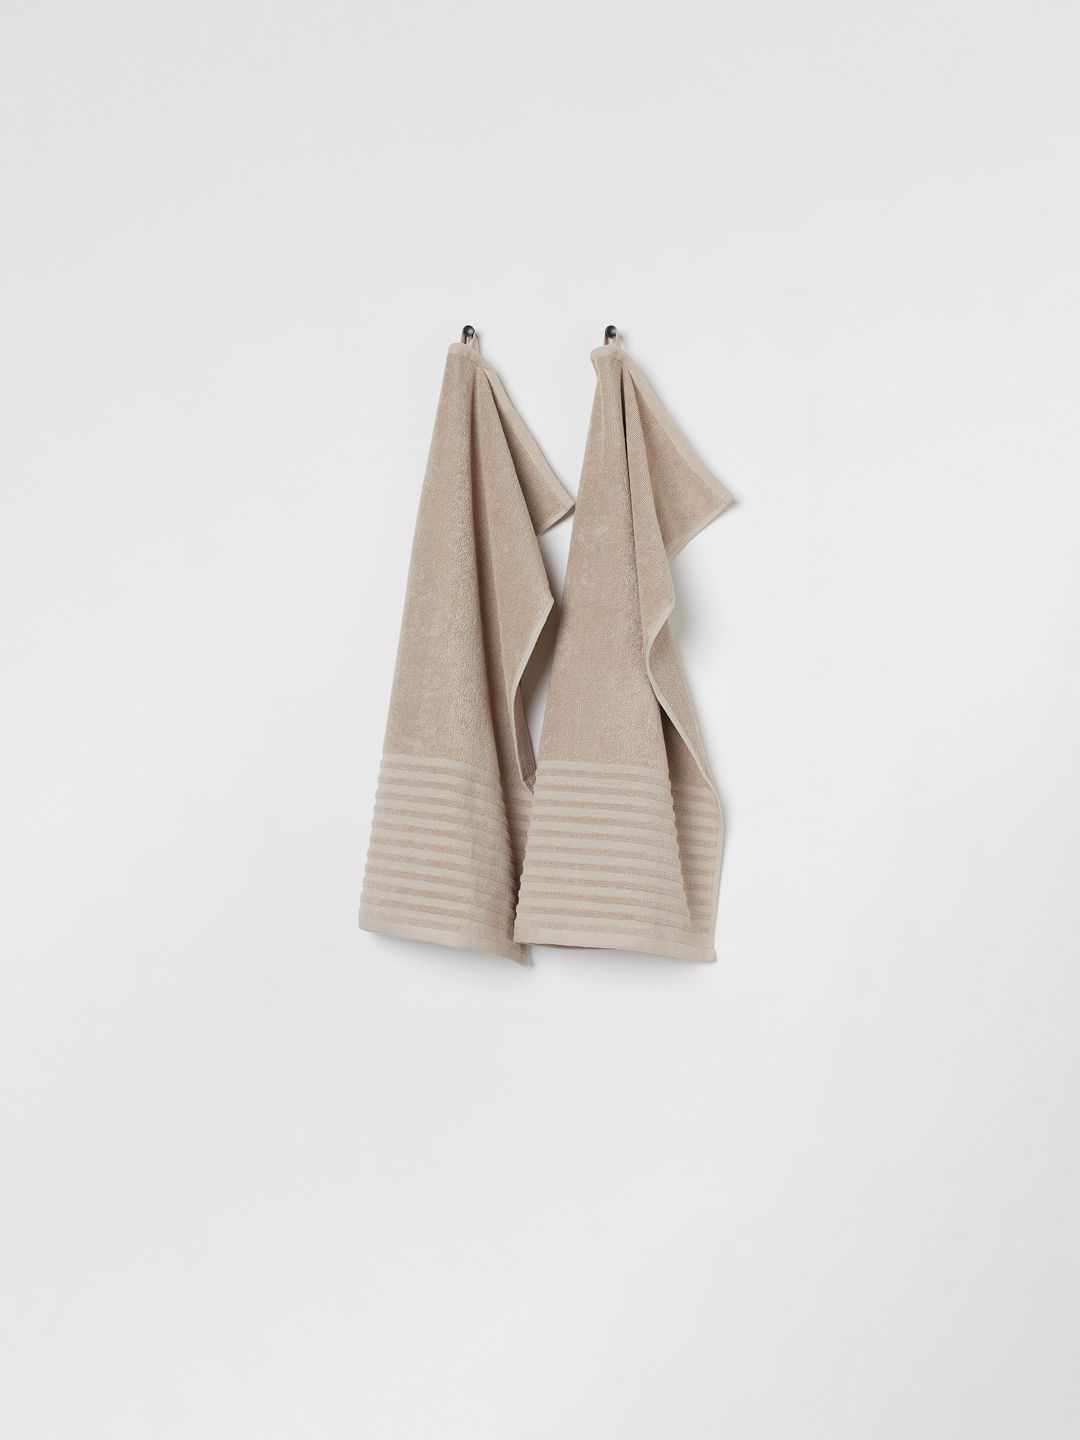 H&M Beige 2-Pack Cotton Hand Towels Price in India